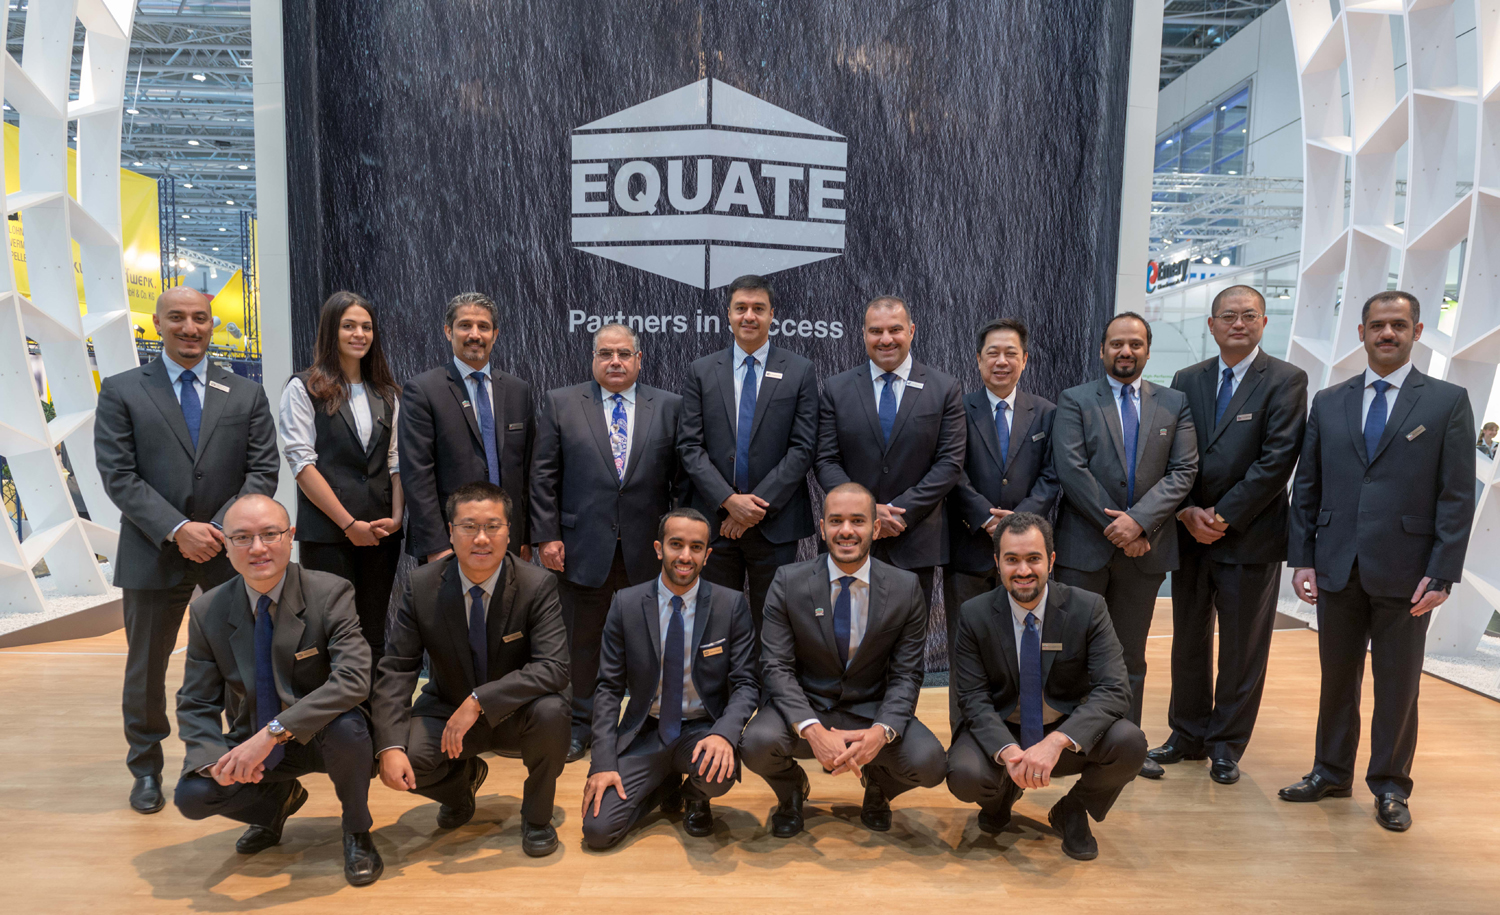 Kuwait Ambassador to Germany Munther Al-Essa during Equate Petrochemical in an international trade exhibition for plastics and rubber in Dusseldorf